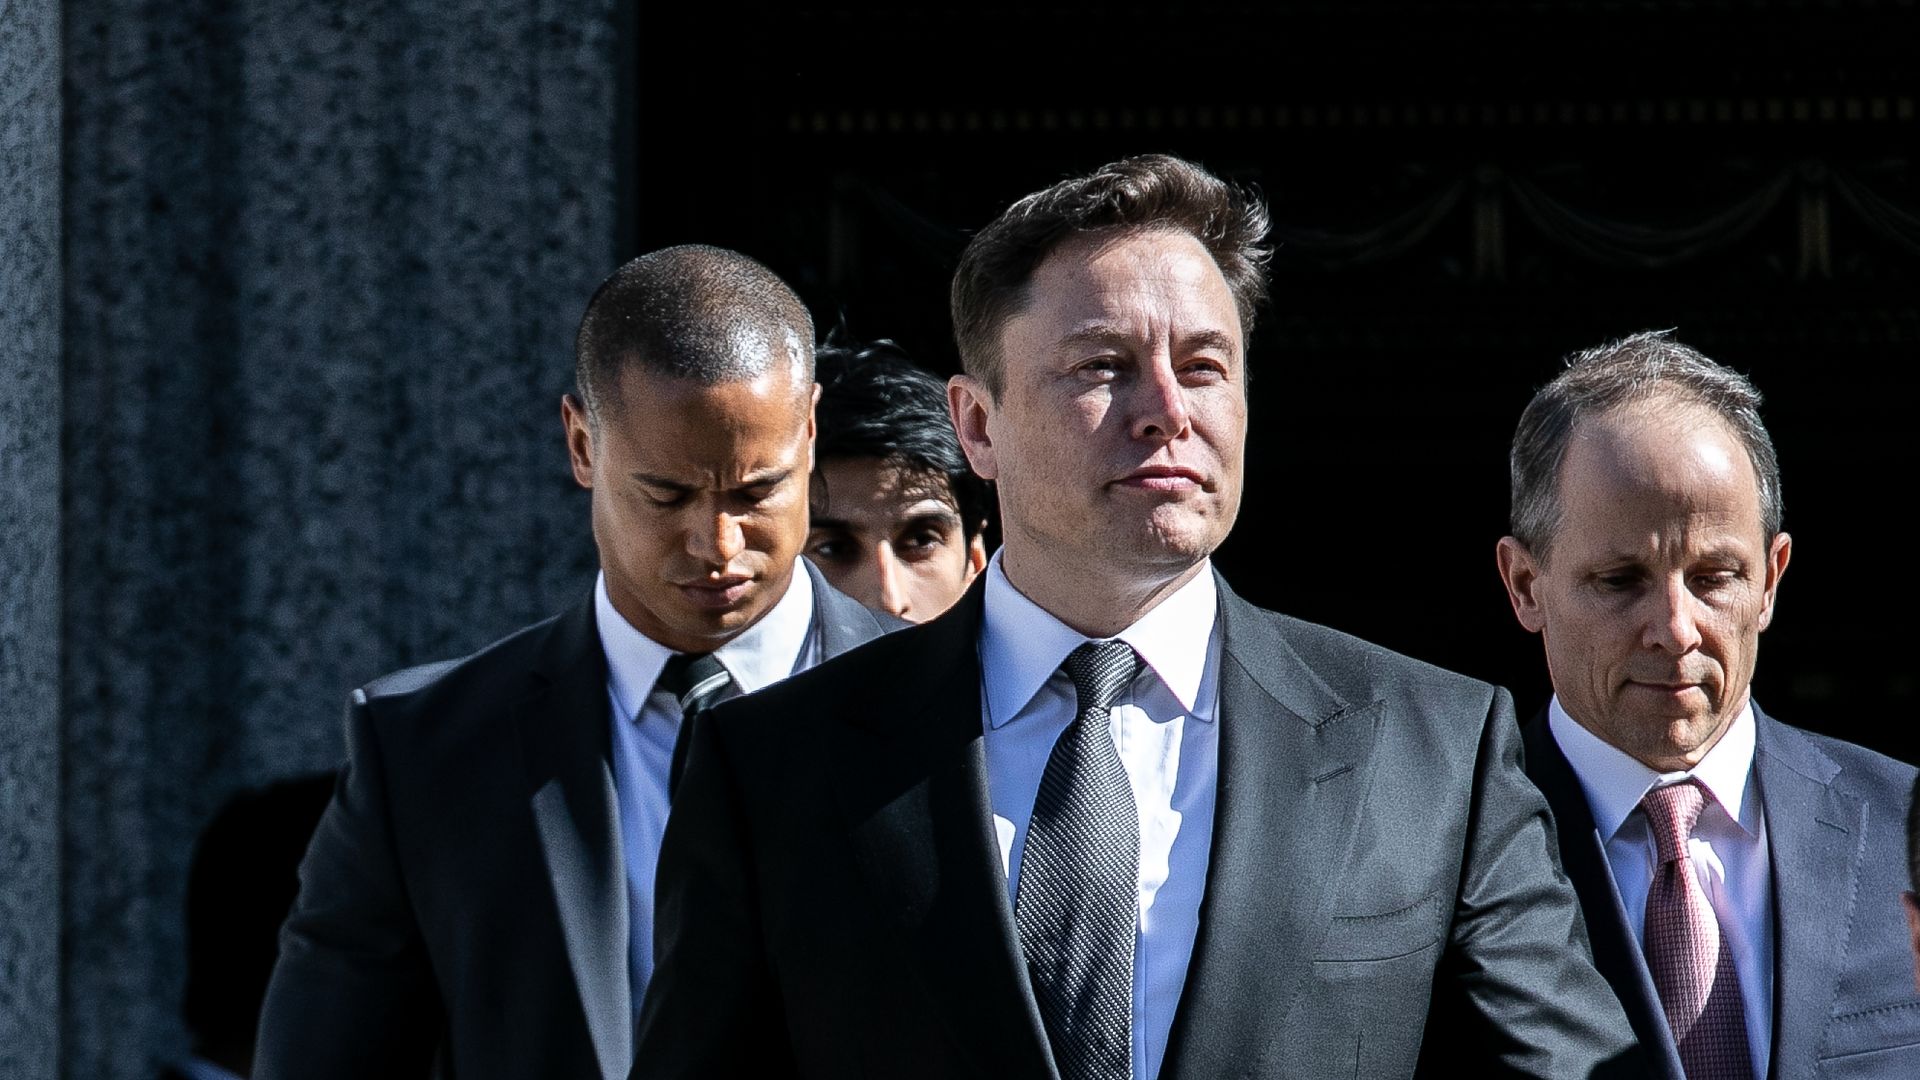 Photo of Elon Musk walking with bodyguards behind him